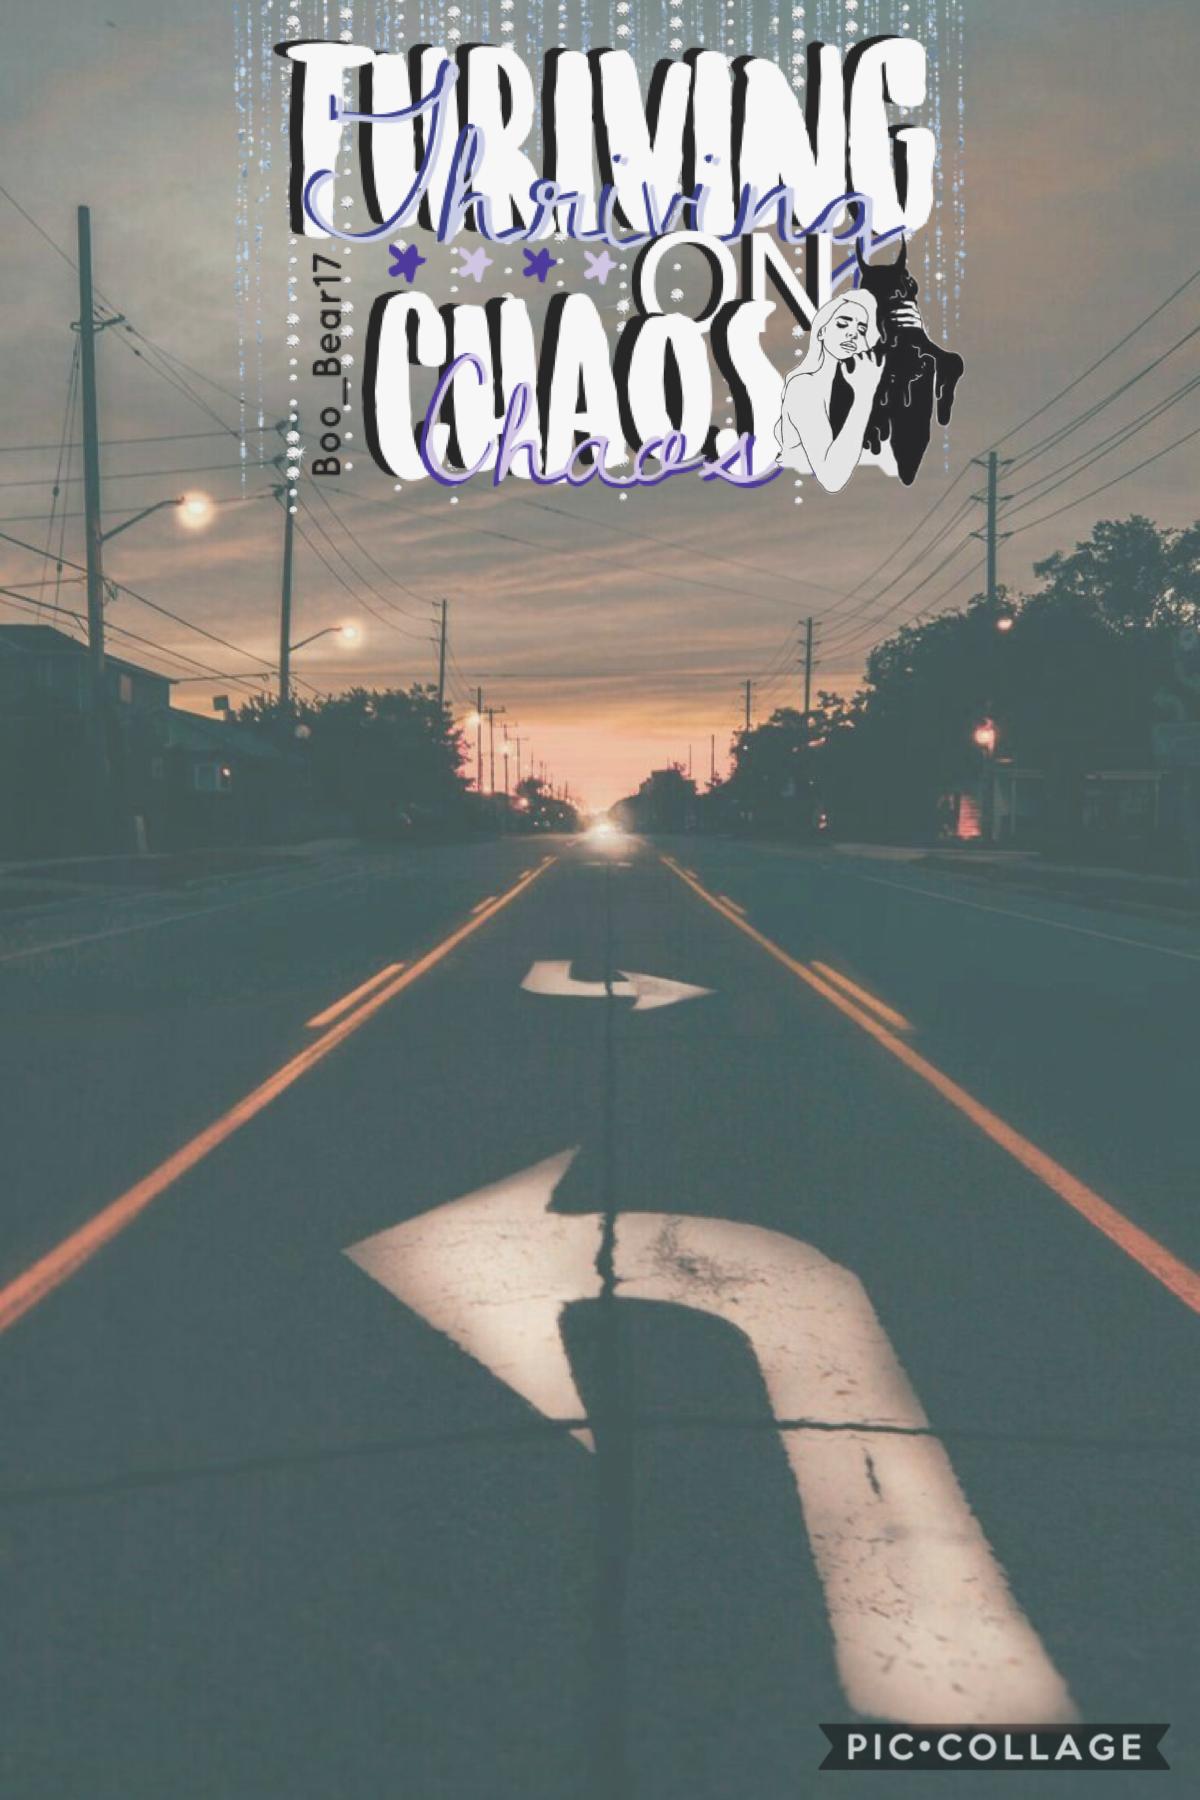 👾thriving on chaos👾
•just finished watching the 5sos Instagram live and it definitely made my night
•also wanna apologize for the inactivity once again, quarantine has kept me busy (y’all stay safe)
•song rec: Best Years by 5SOS